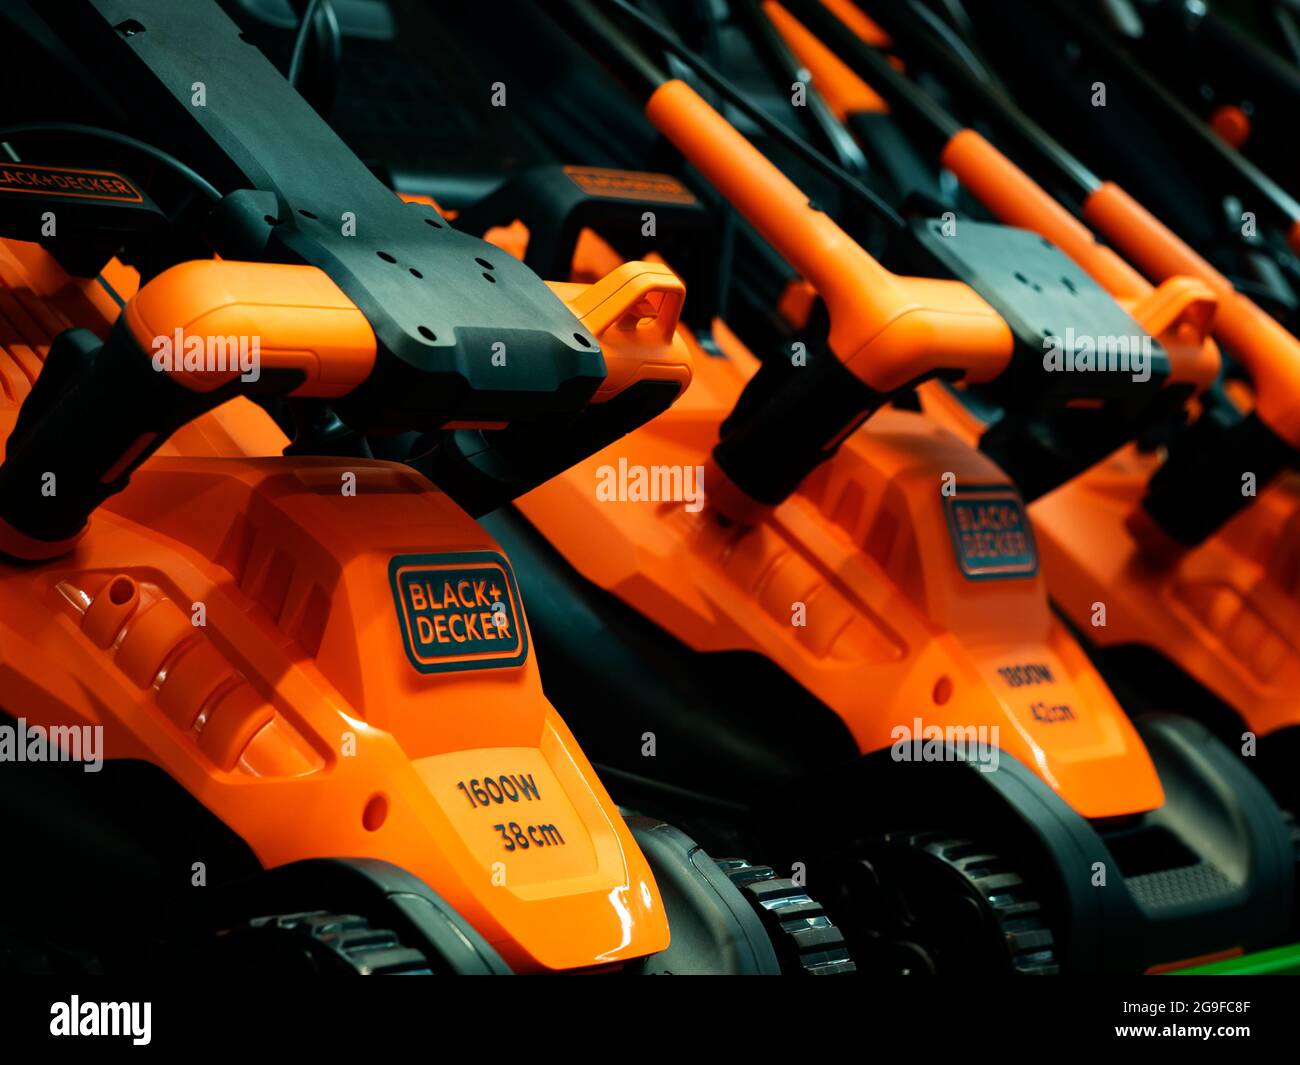 https://c8.alamy.com/comp/2G9FC8F/in-this-photo-illustration-black-decker-electric-lawn-mowers-for-sale-in-a-store-2G9FC8F.jpg